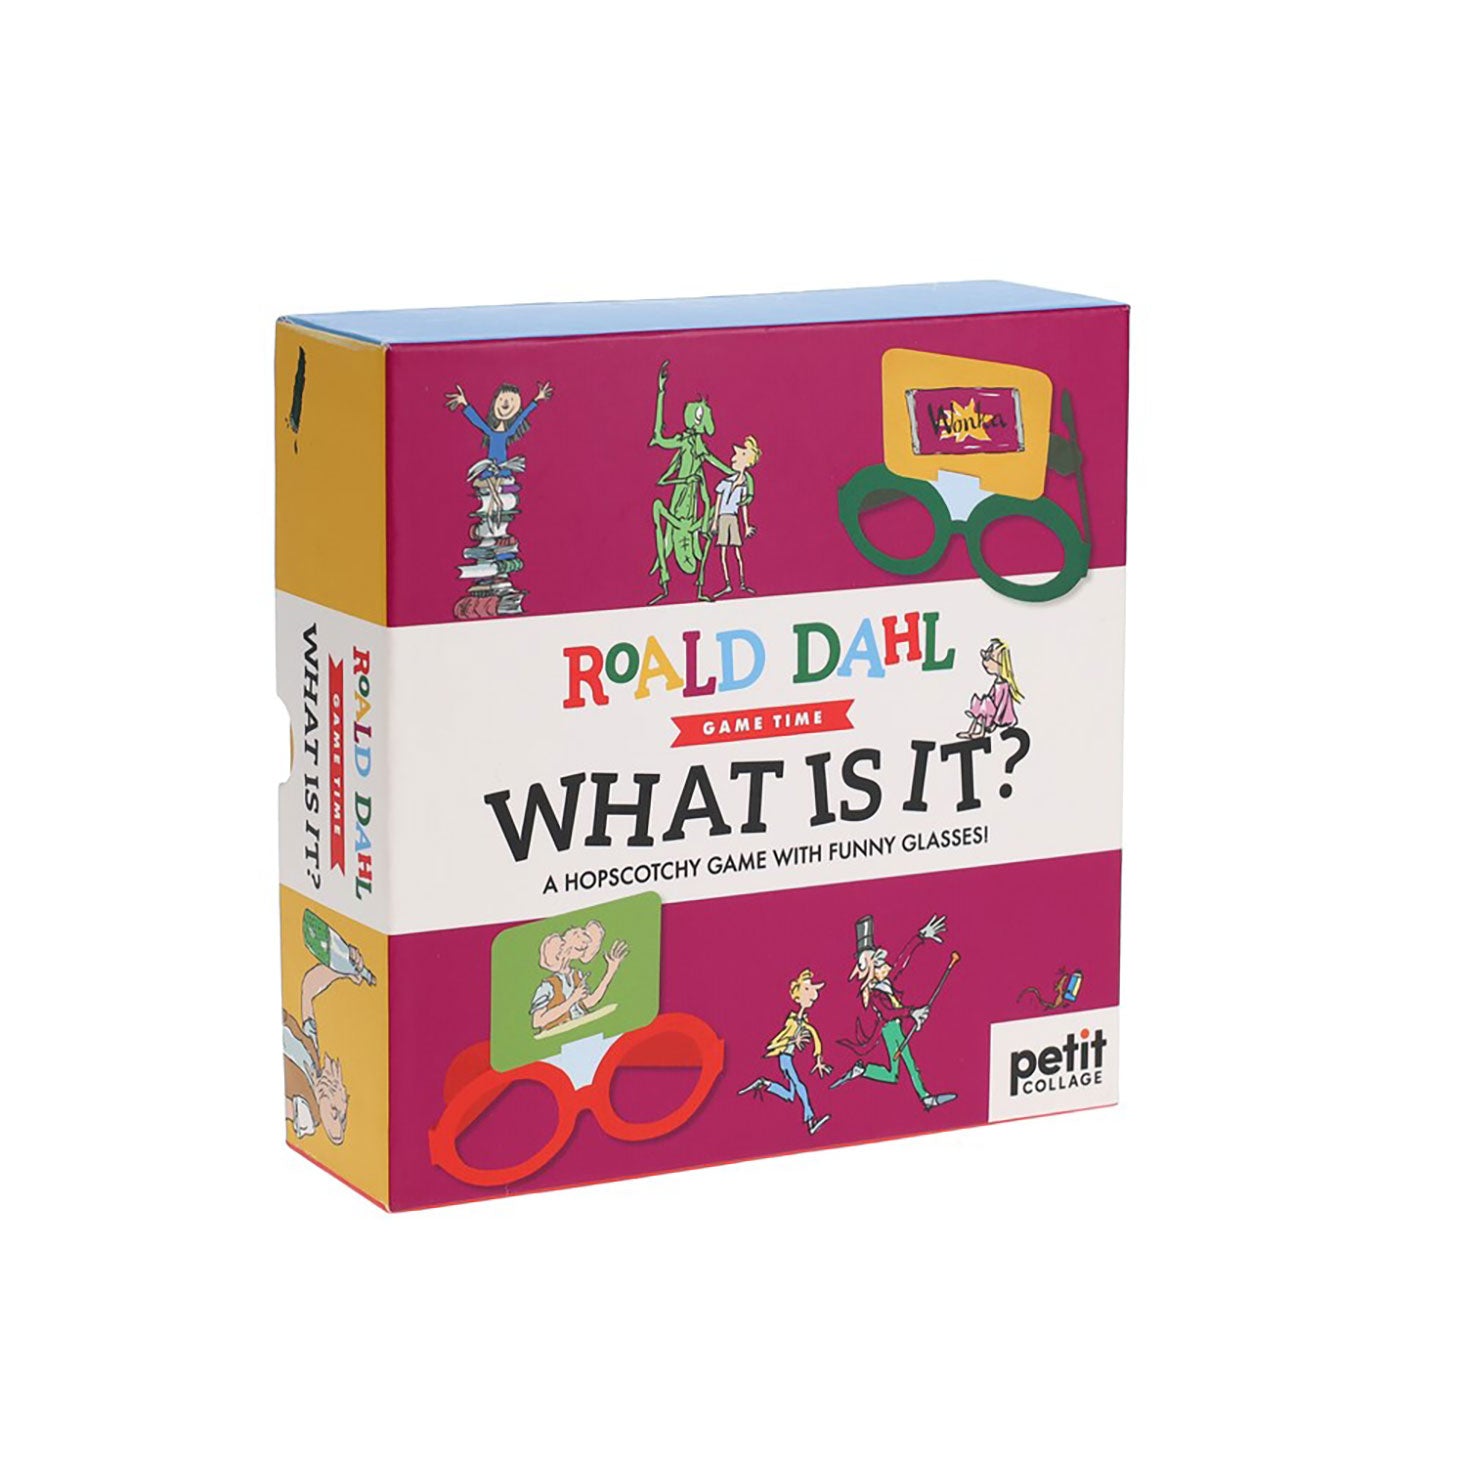 What Is It? Game based on Roald Dahl's stories with illustrations by Quentin Blake